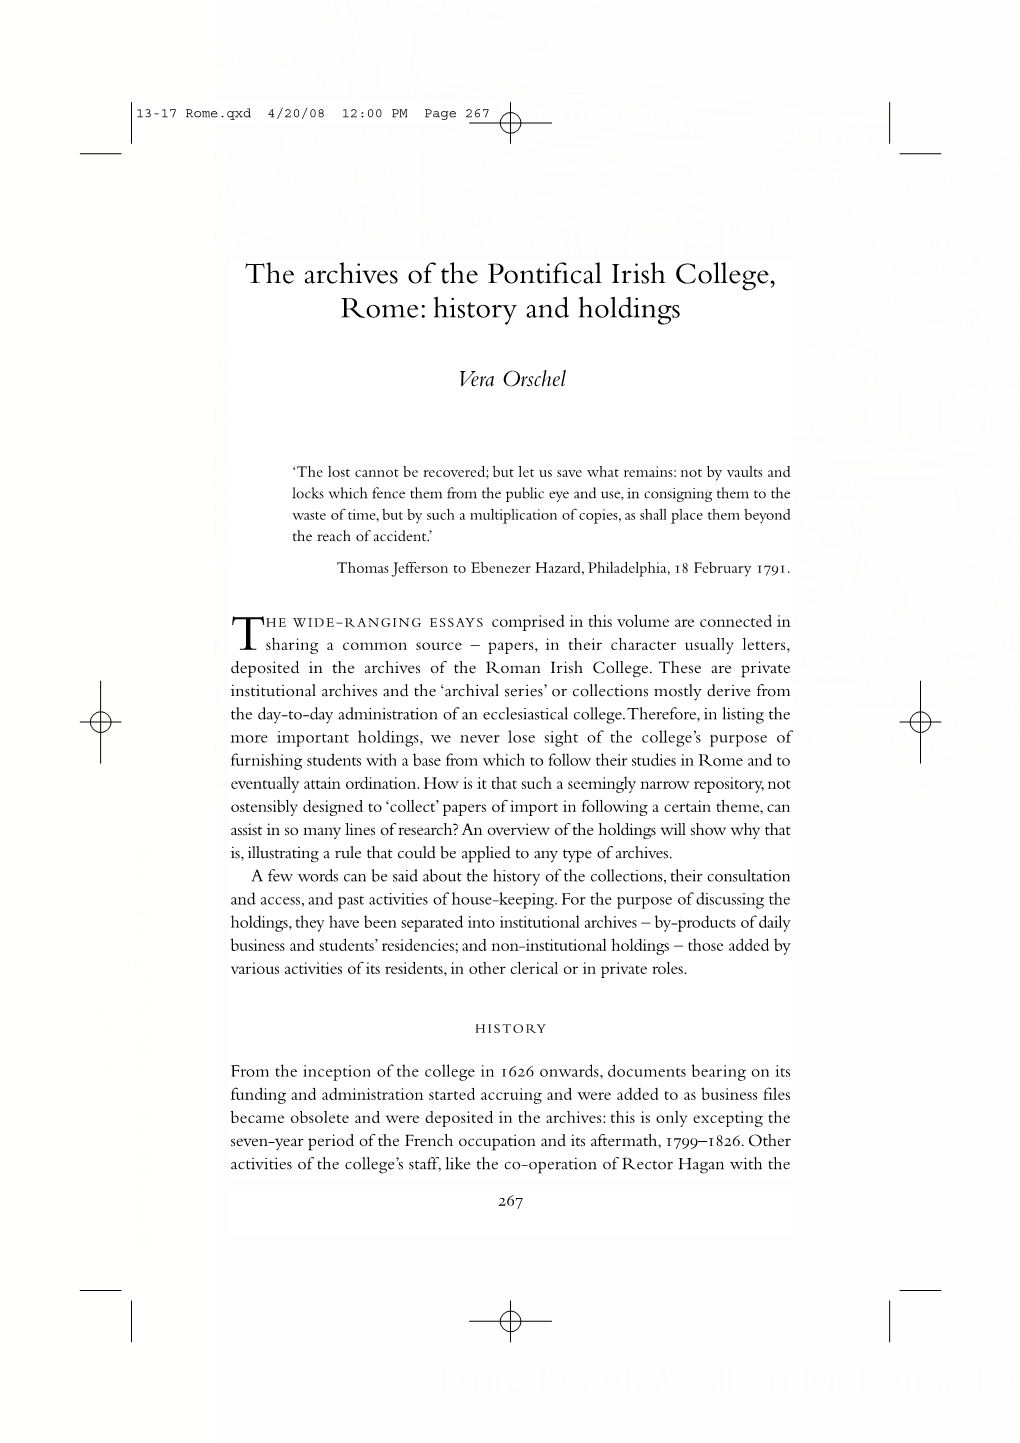 The Archives of the Pontifical Irish College Rome